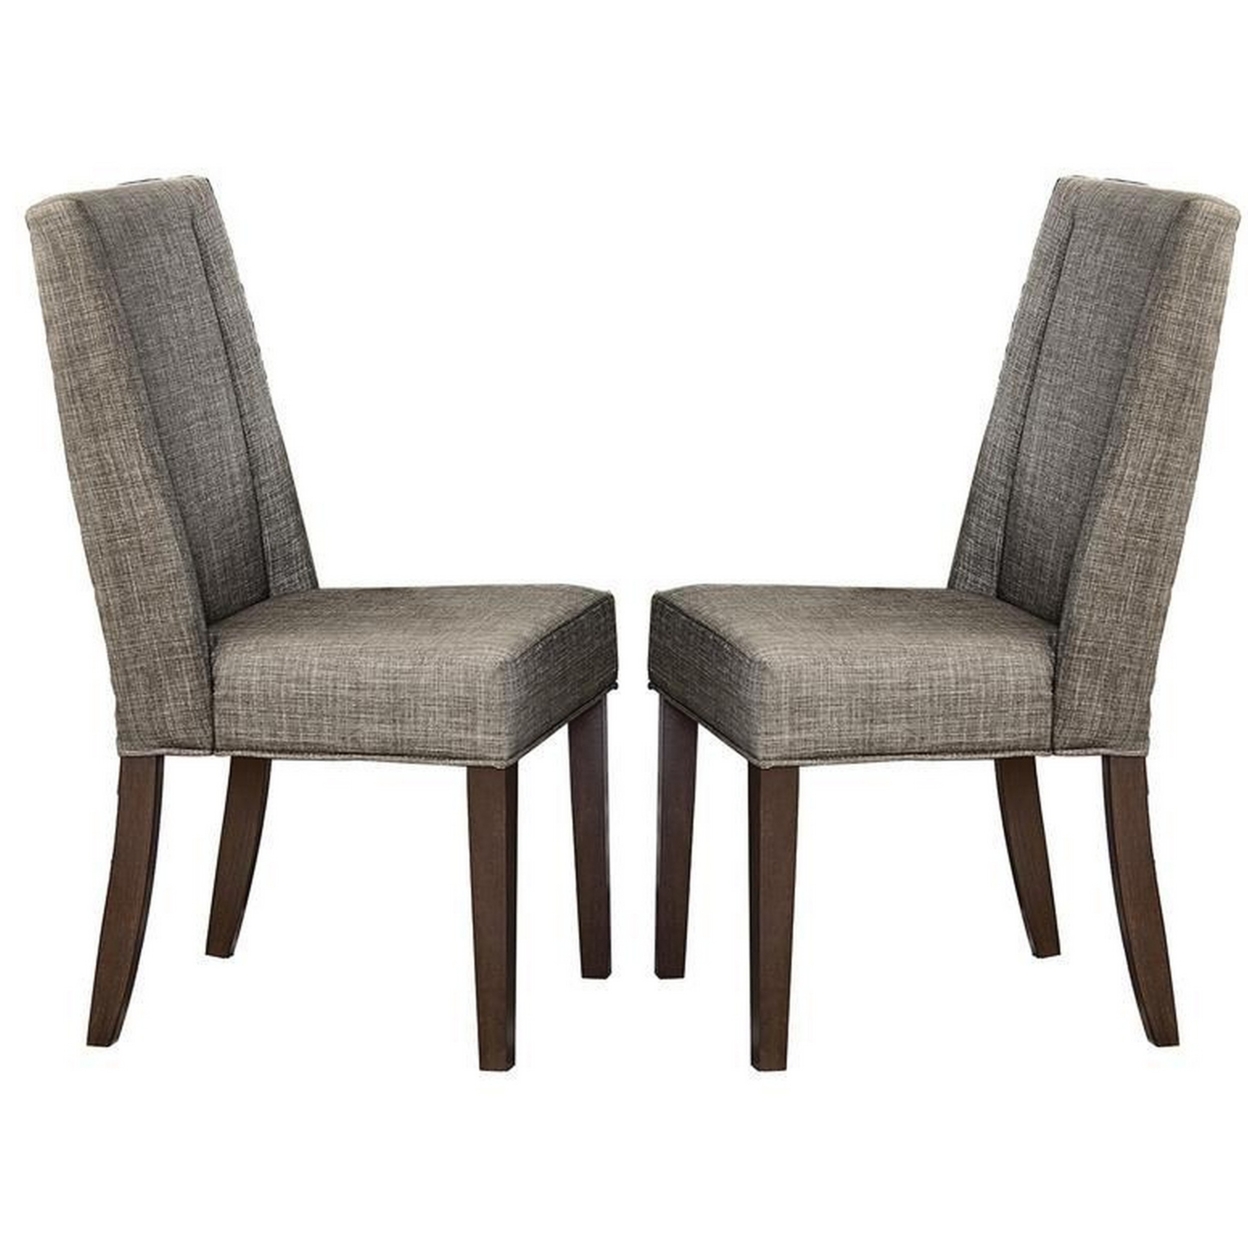 Wood & Fabric Dining Side Chair With Shallow Wing Back, Gray & Dark Brown, Set Of 2- Saltoro Sherpi